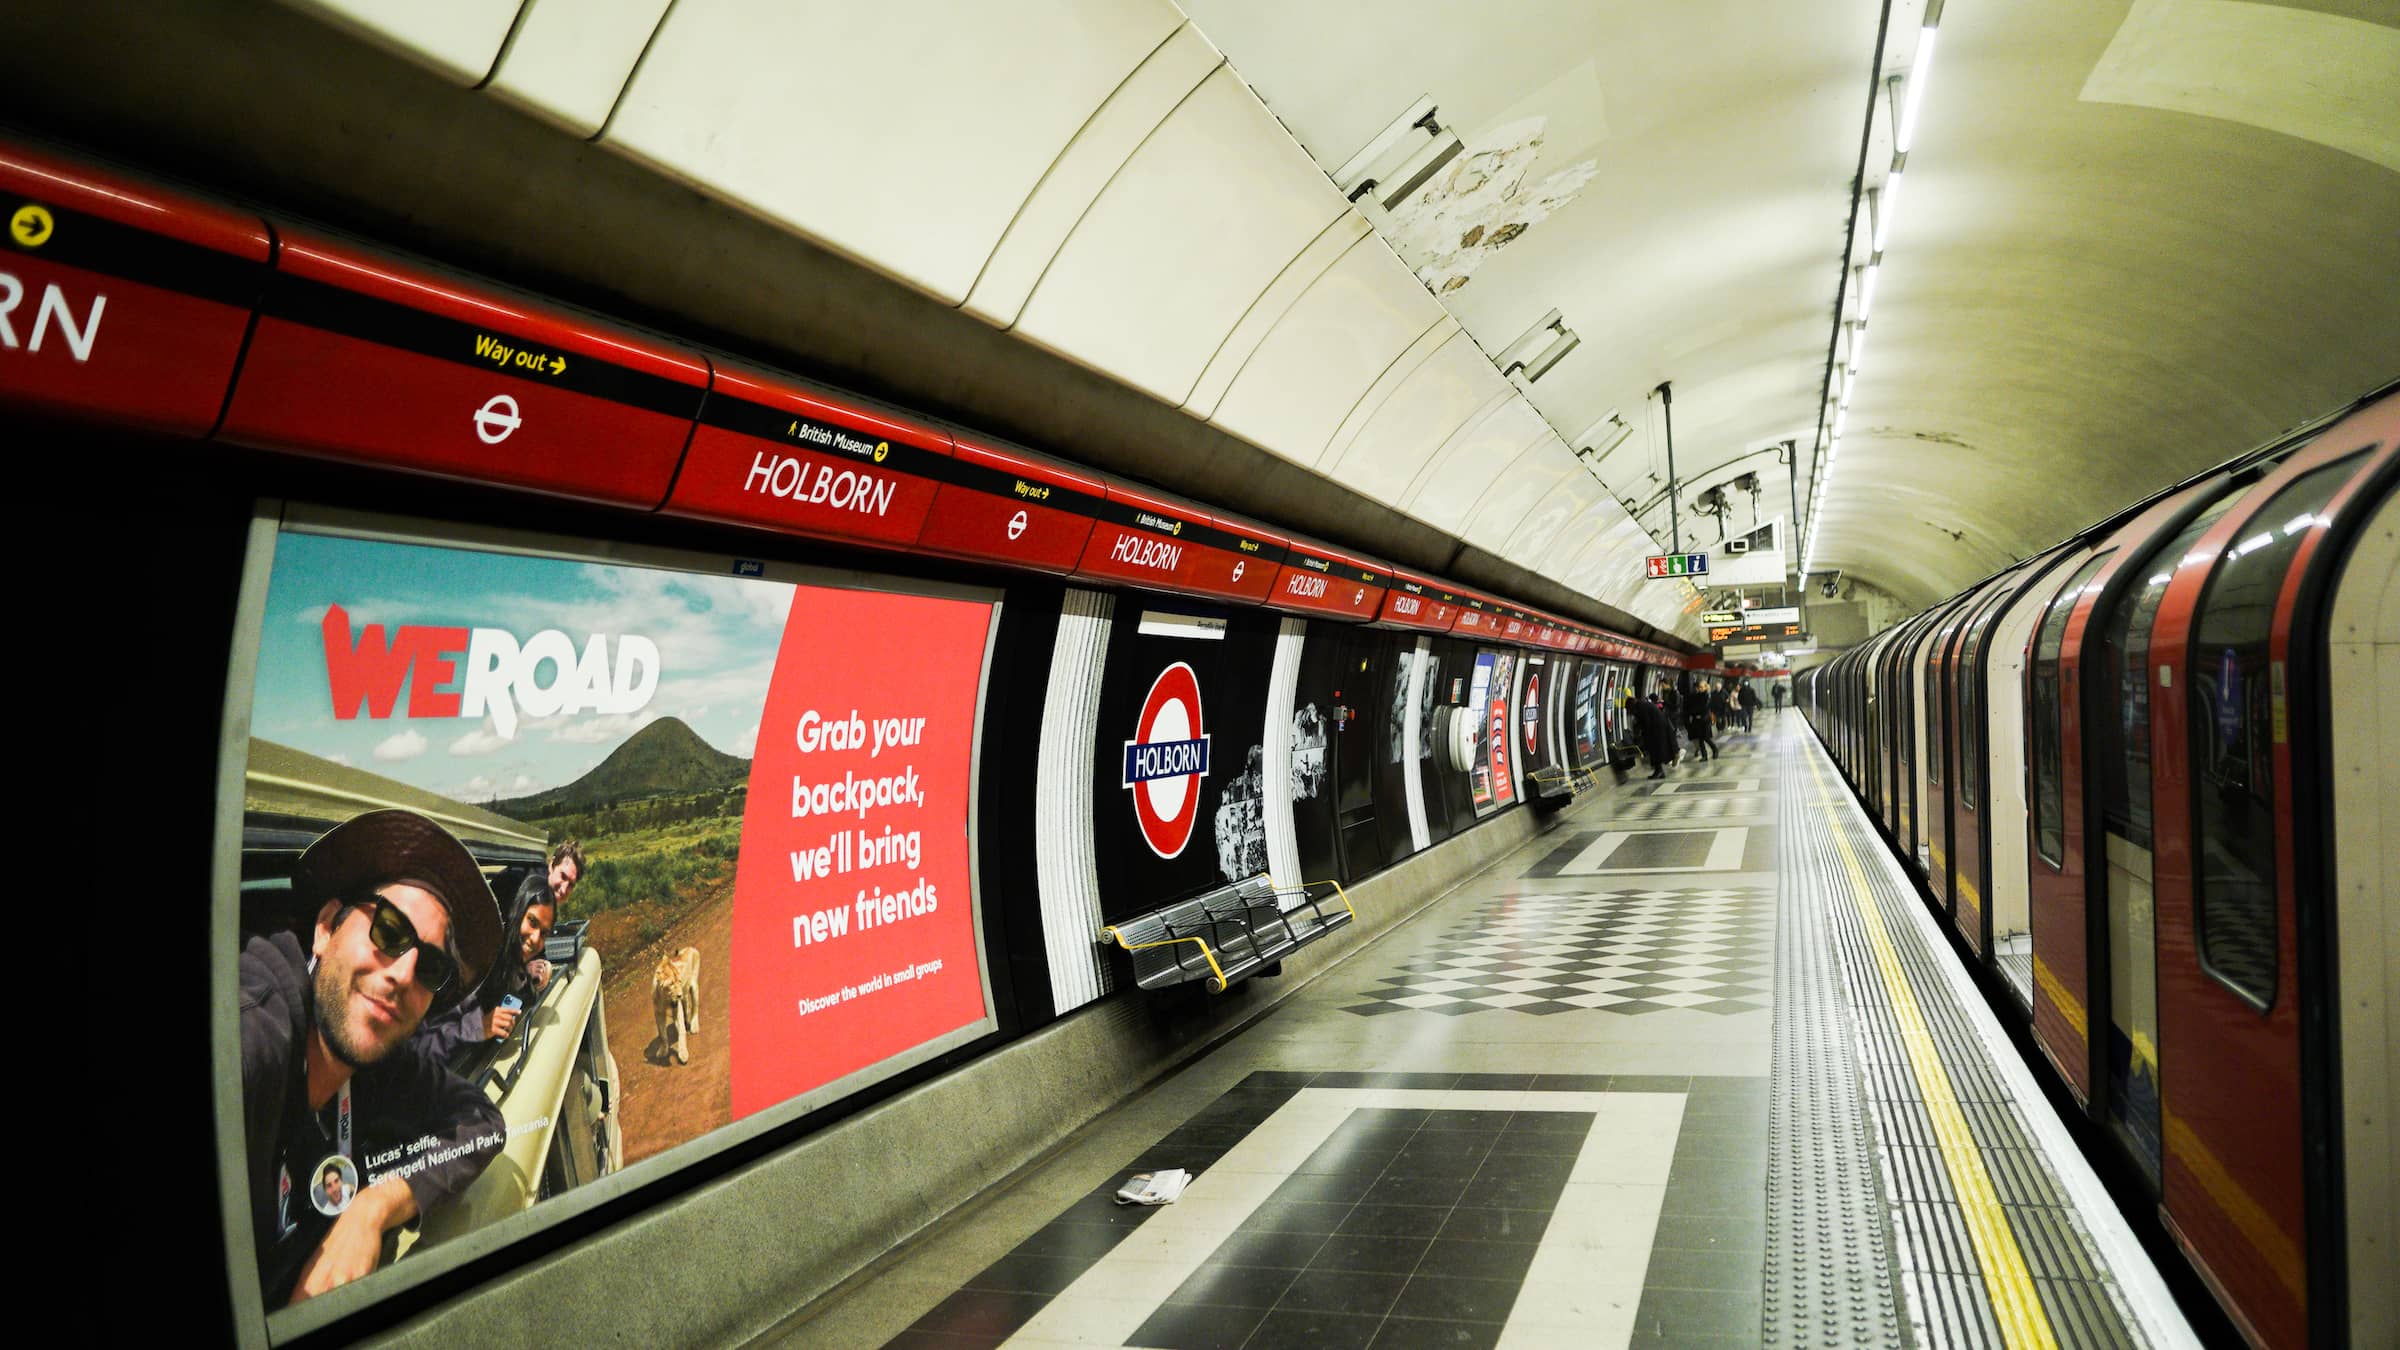 Anything but plane: weroad’s first global ooh campaign launches in huge london takeover